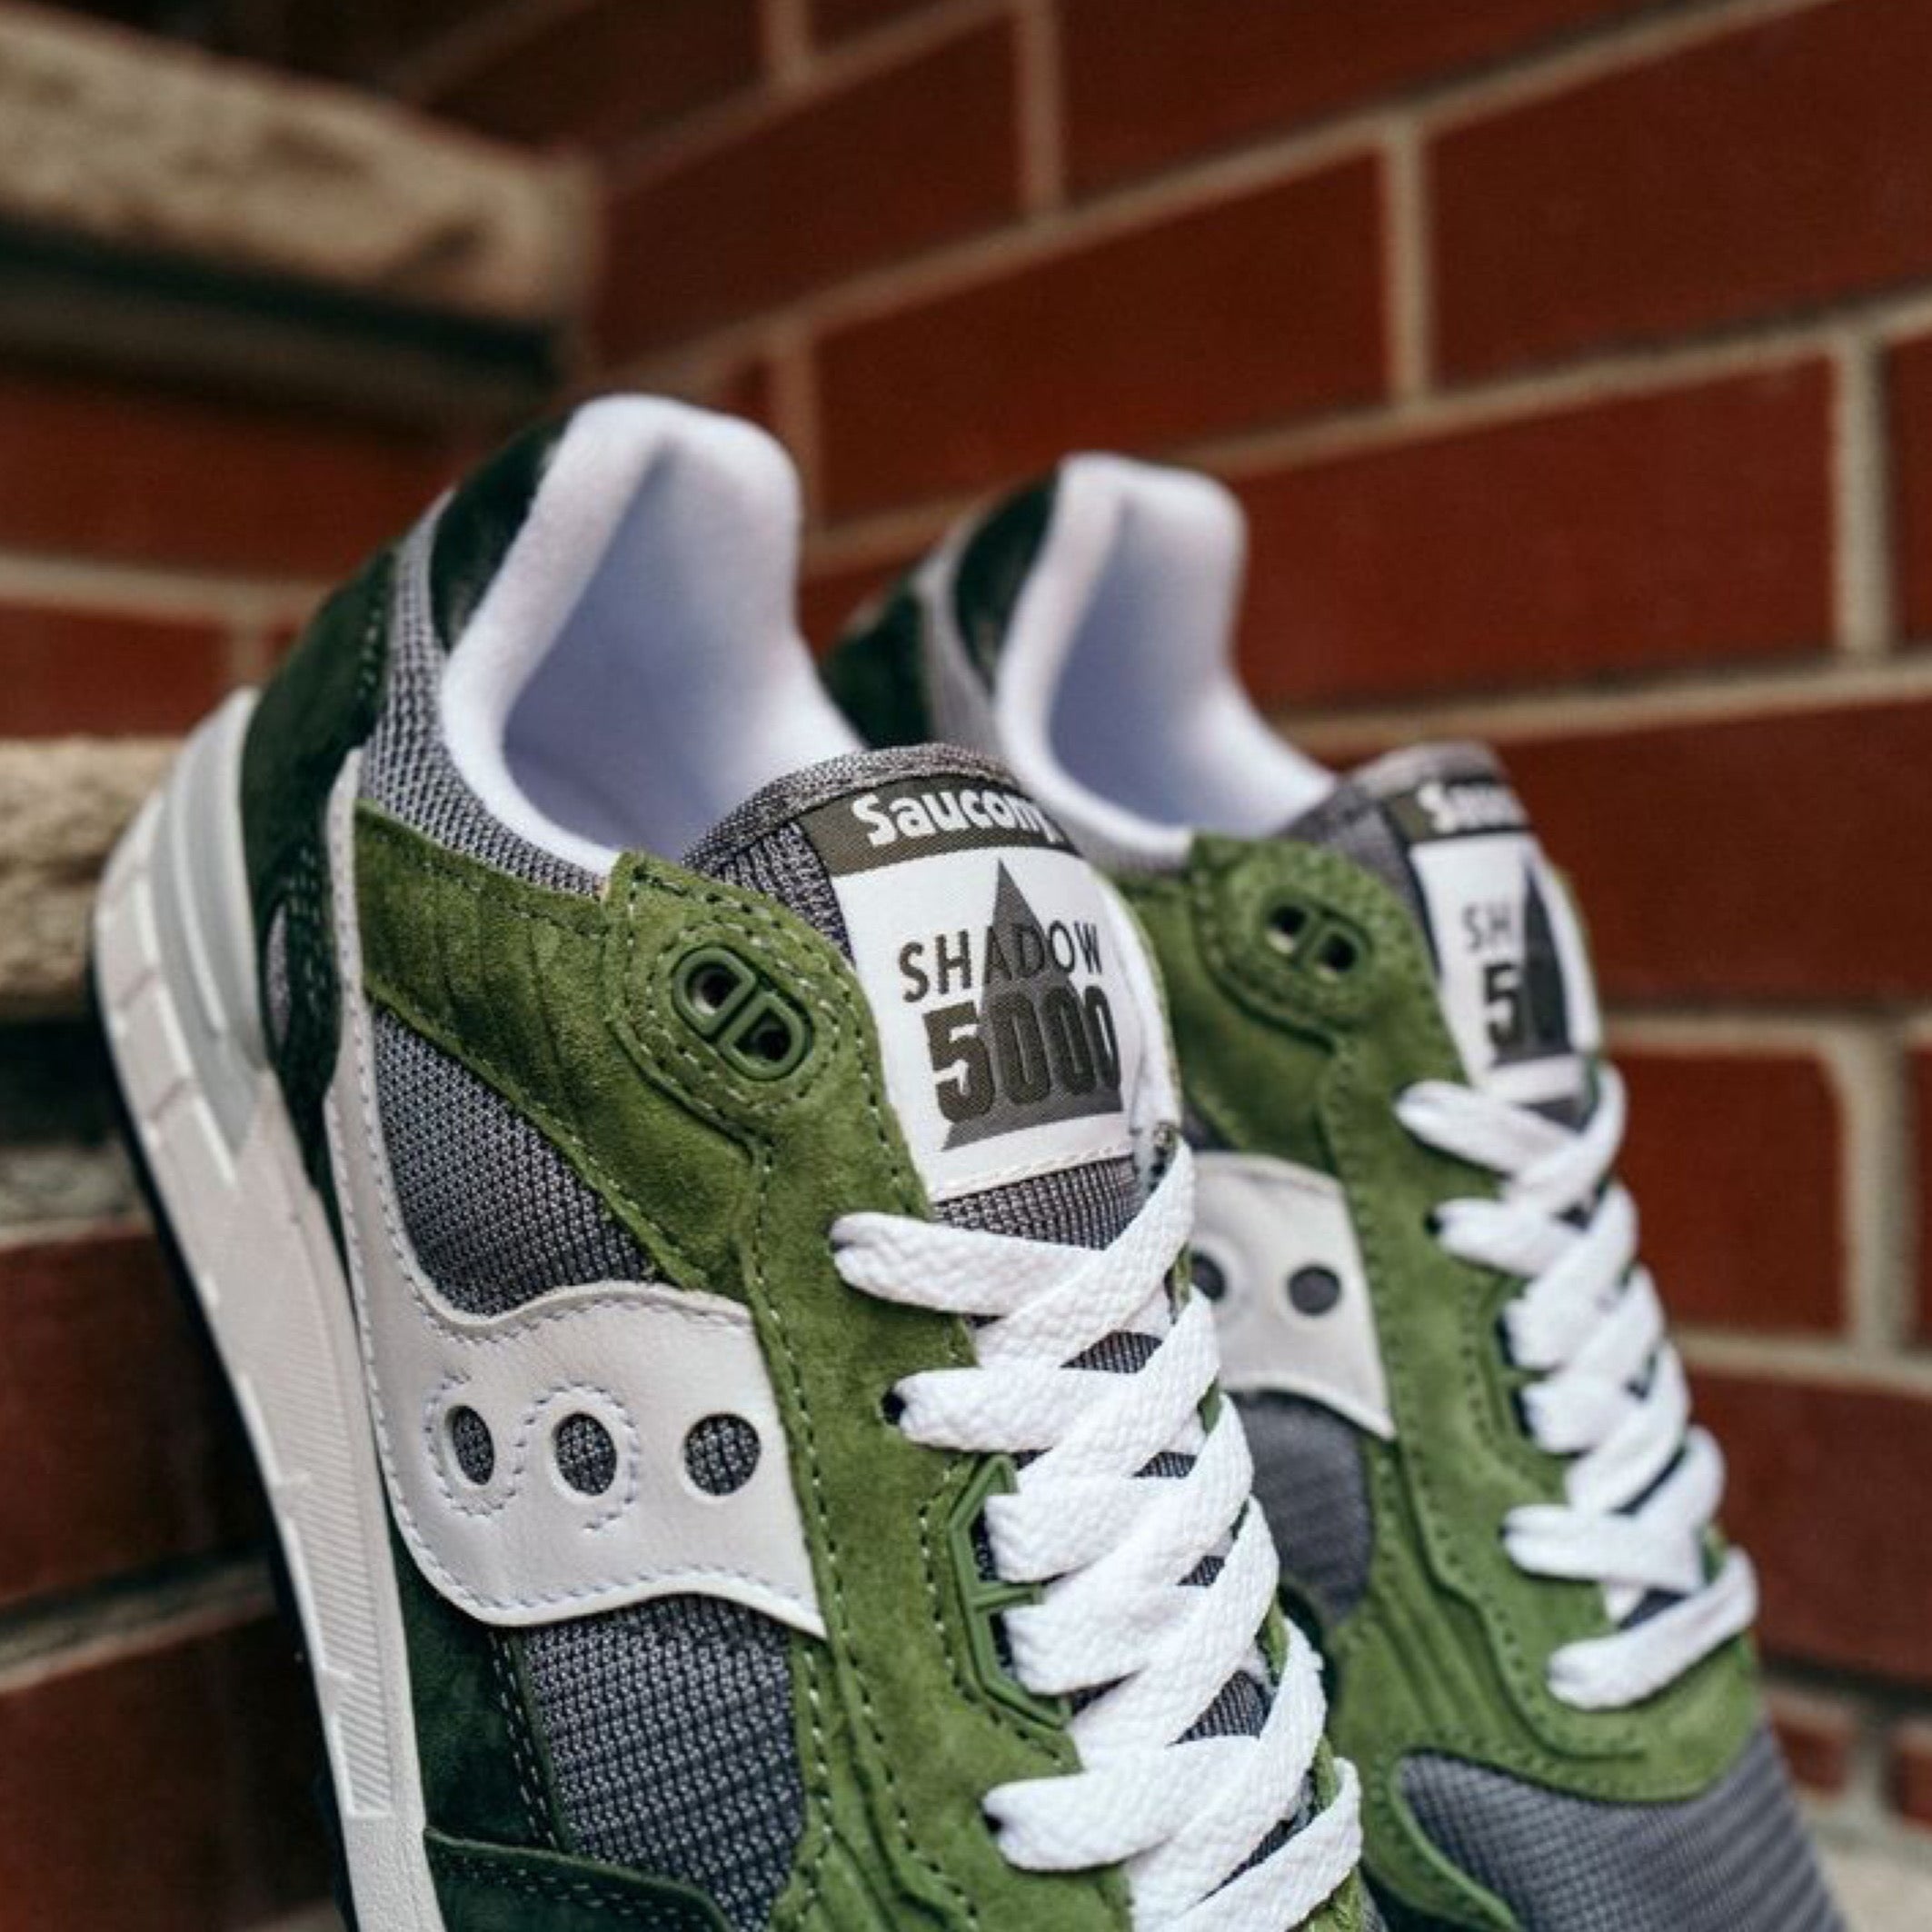 Saucony shadow 5000 green white